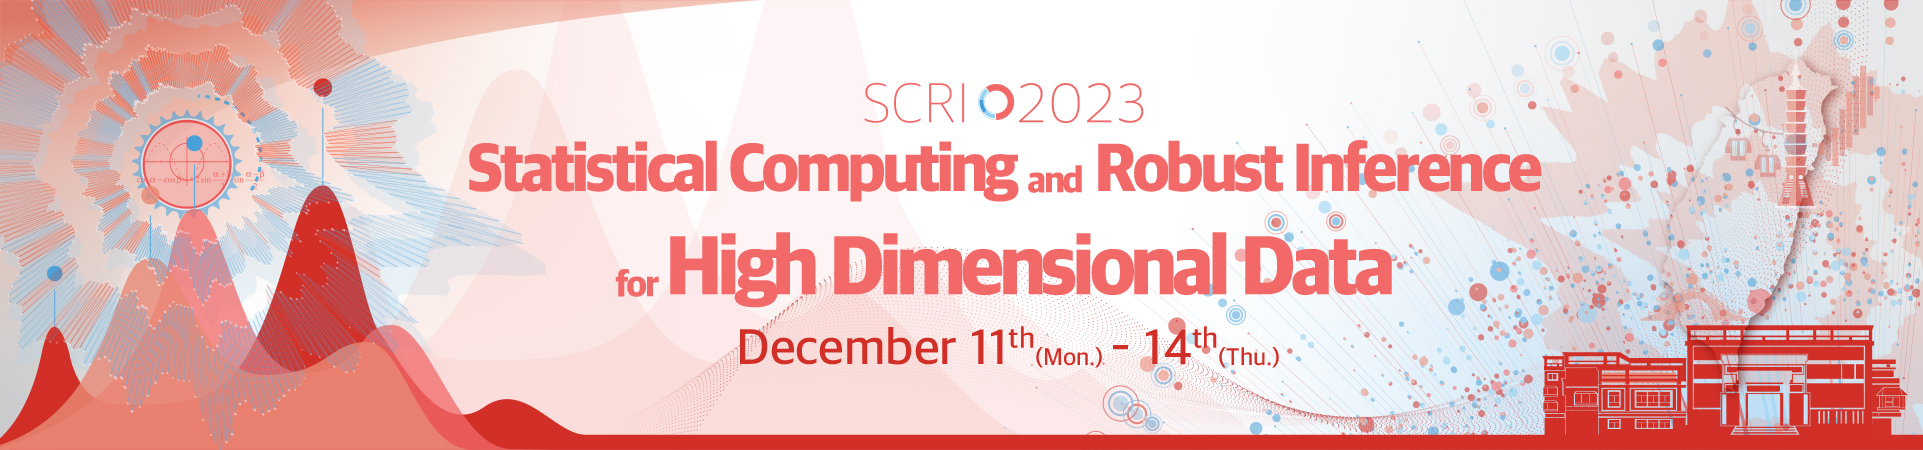 2023 Statistical Computing And Robust Inference For High Dimensional Data